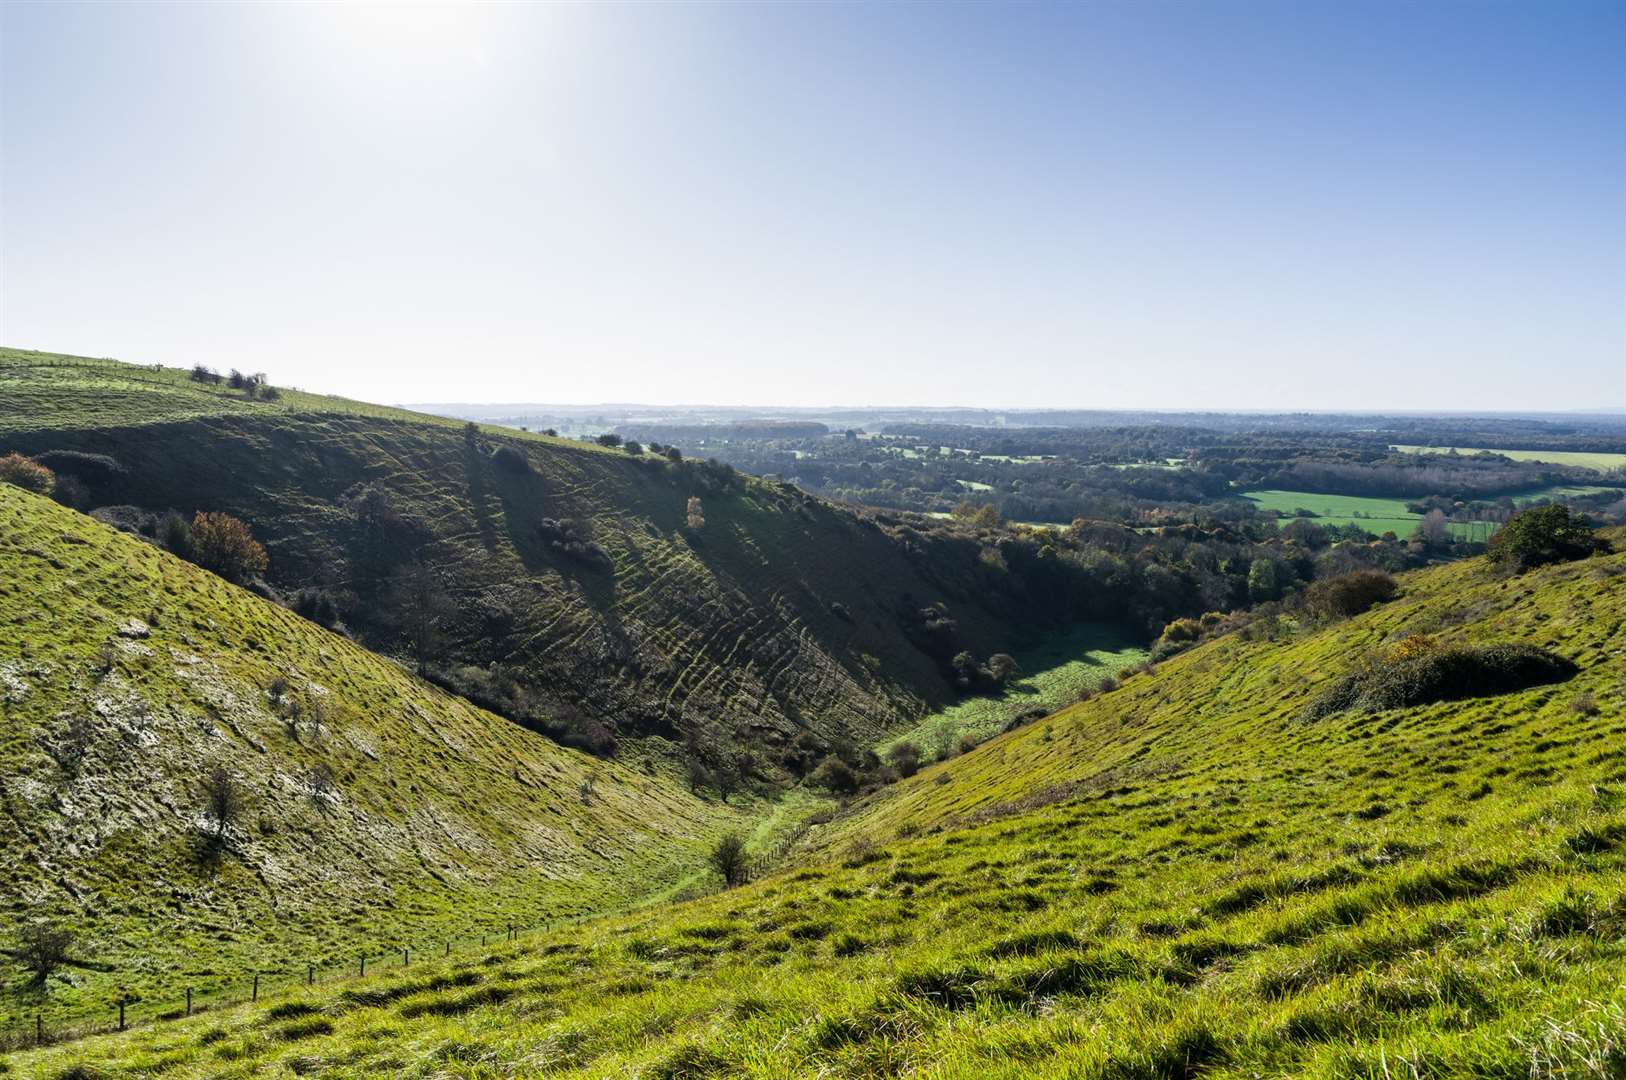 Look out over the Devil's Kneeding Trough near Wye Picture: iStock